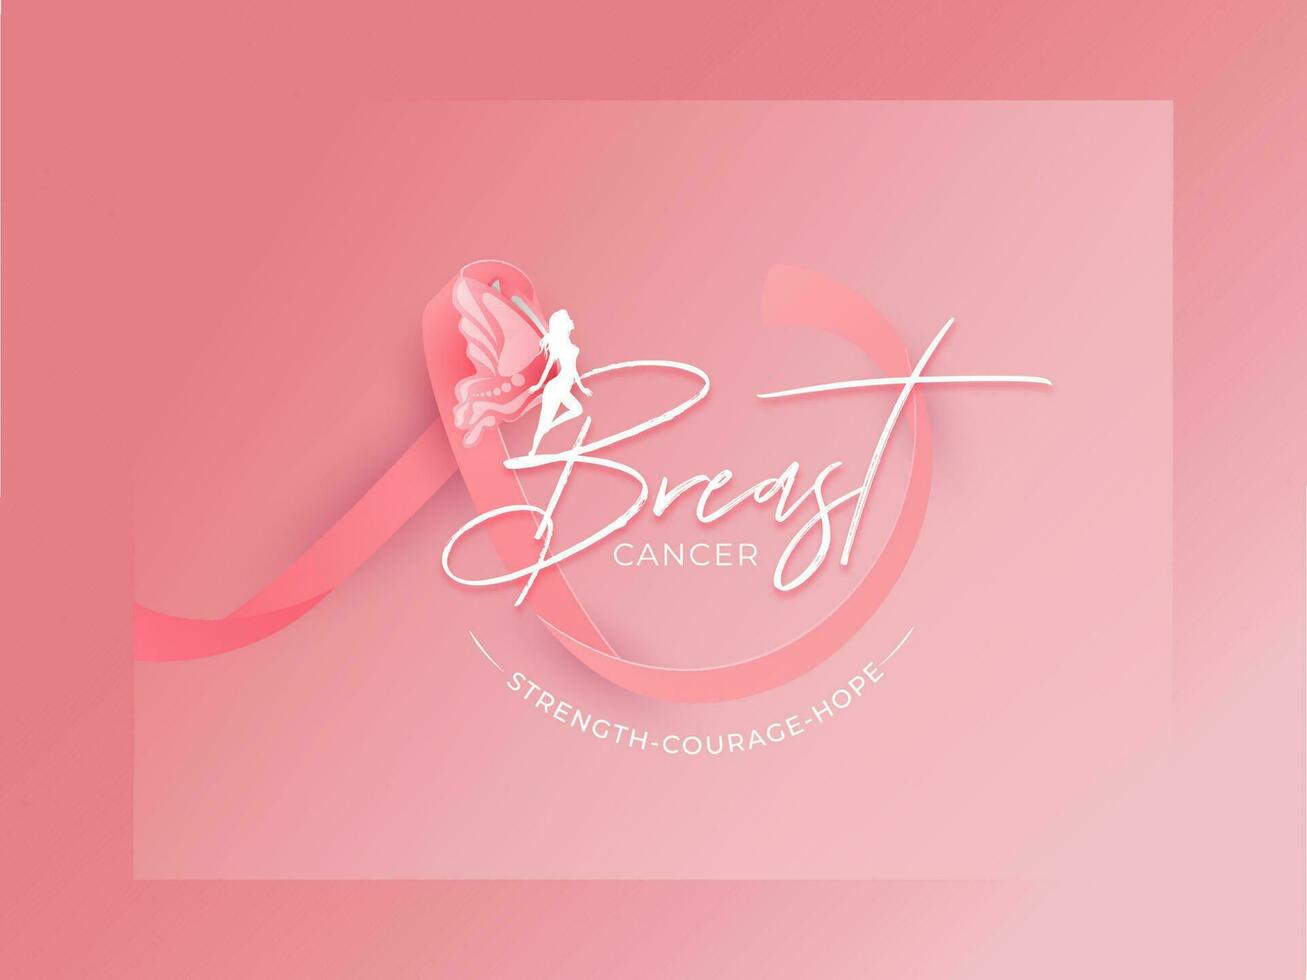 Breast Cancer ribbon with silhouette fairy character and given message as Strength Courage Hope on pink background for Awareness Month concept. vector